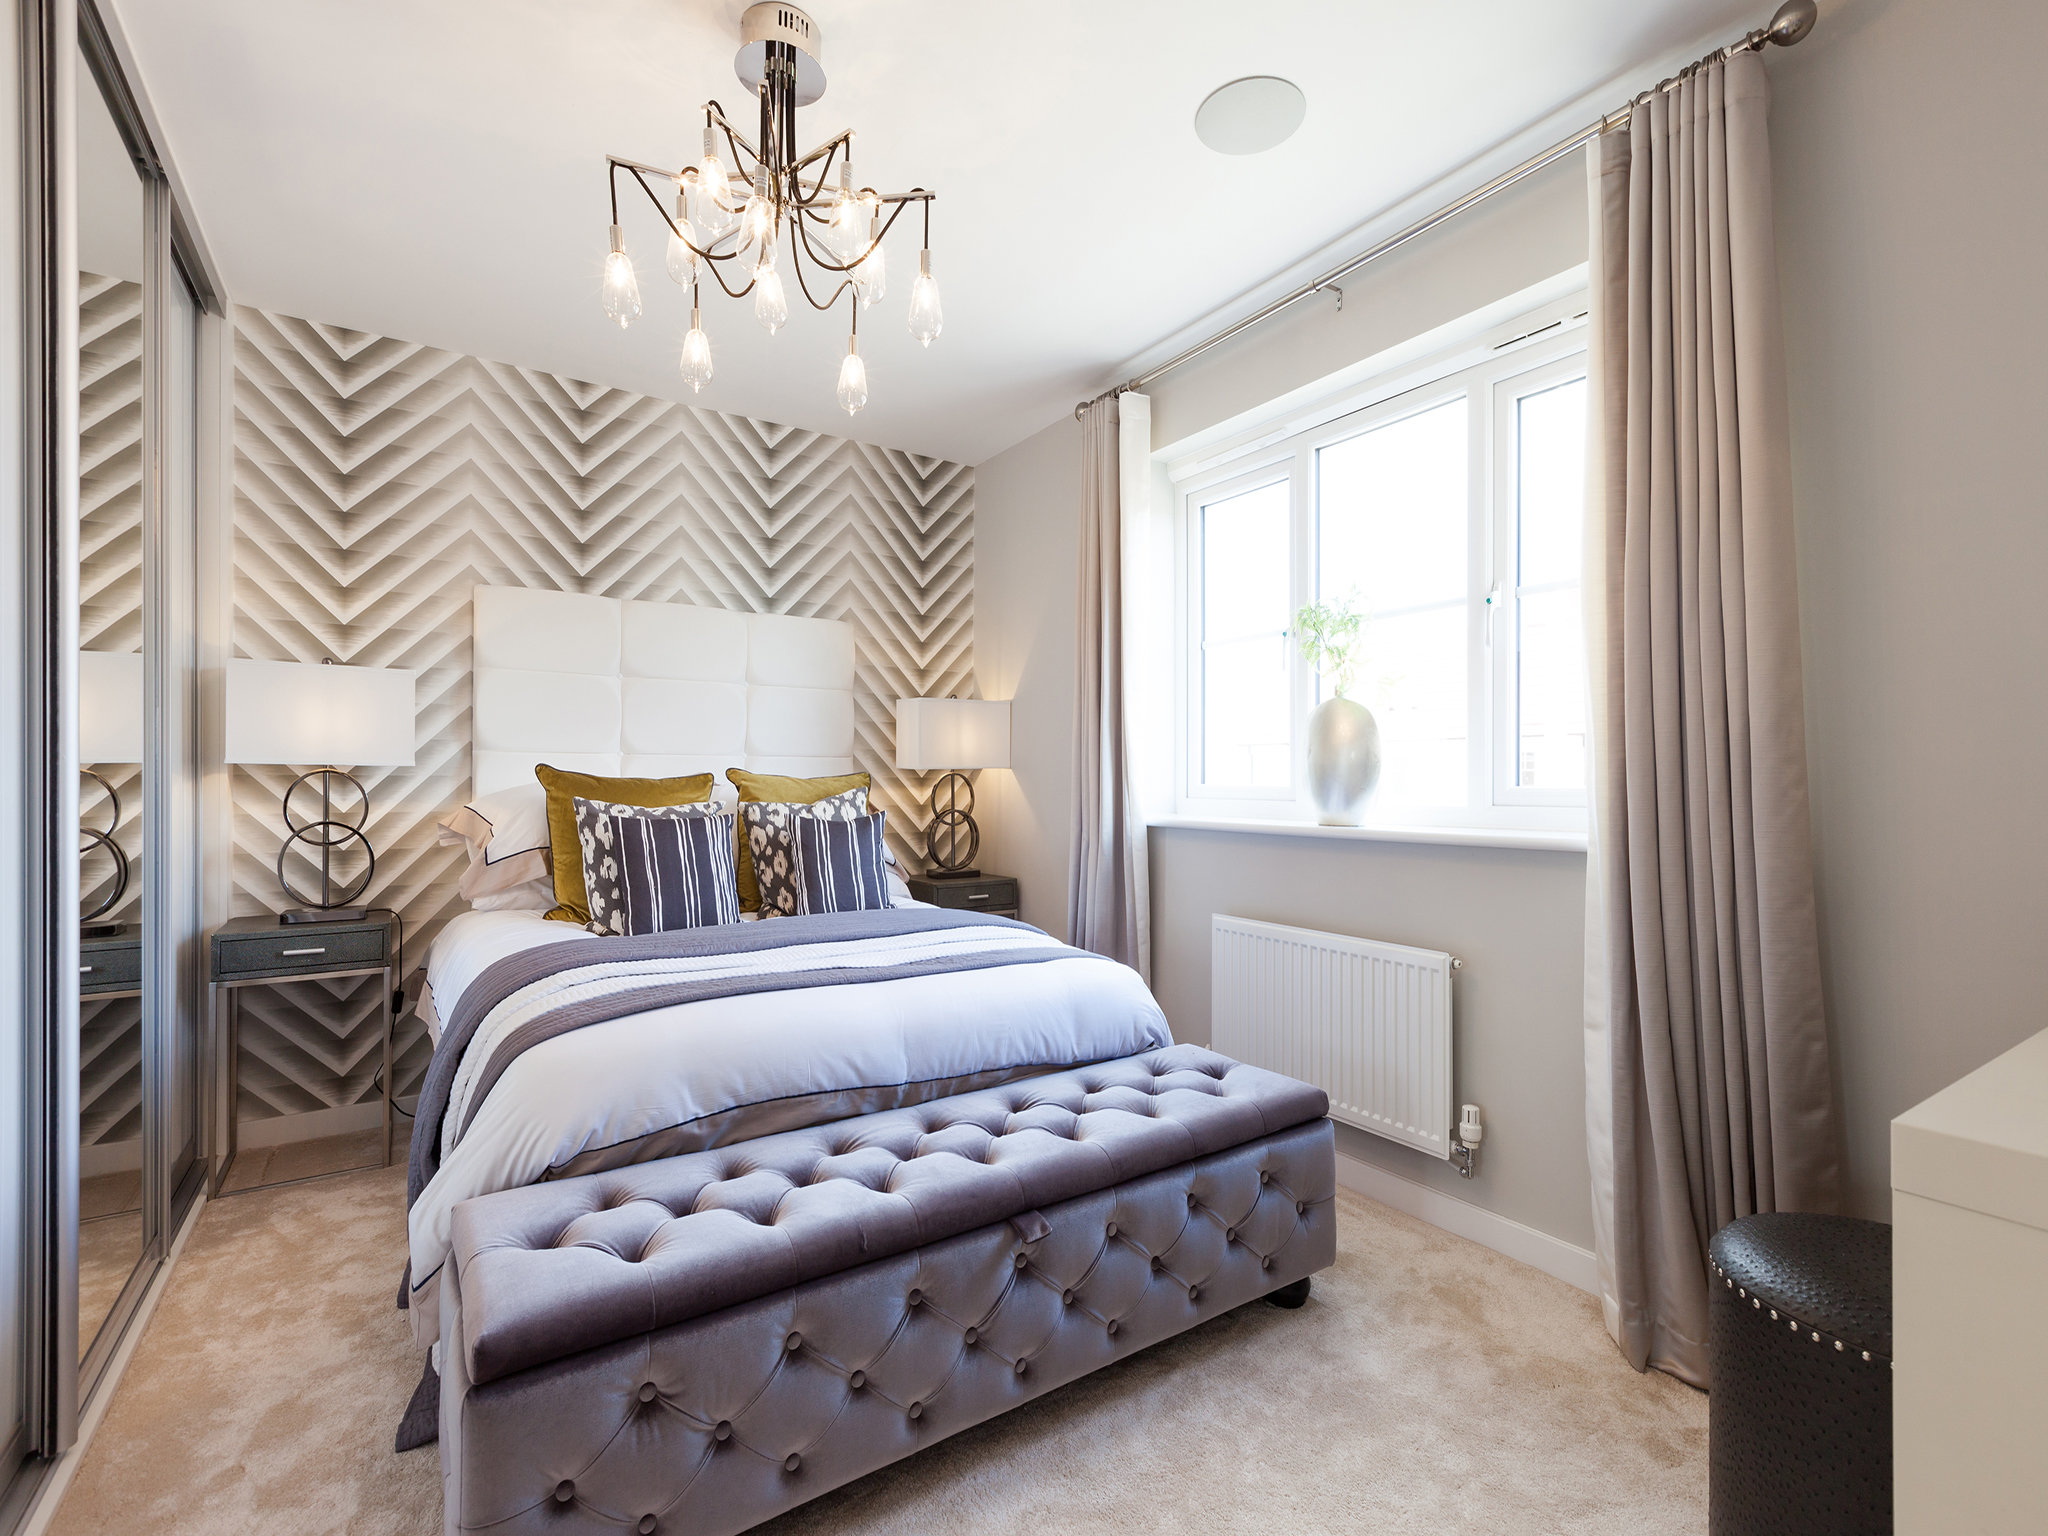 Images Persimmon Homes Bishops Mead